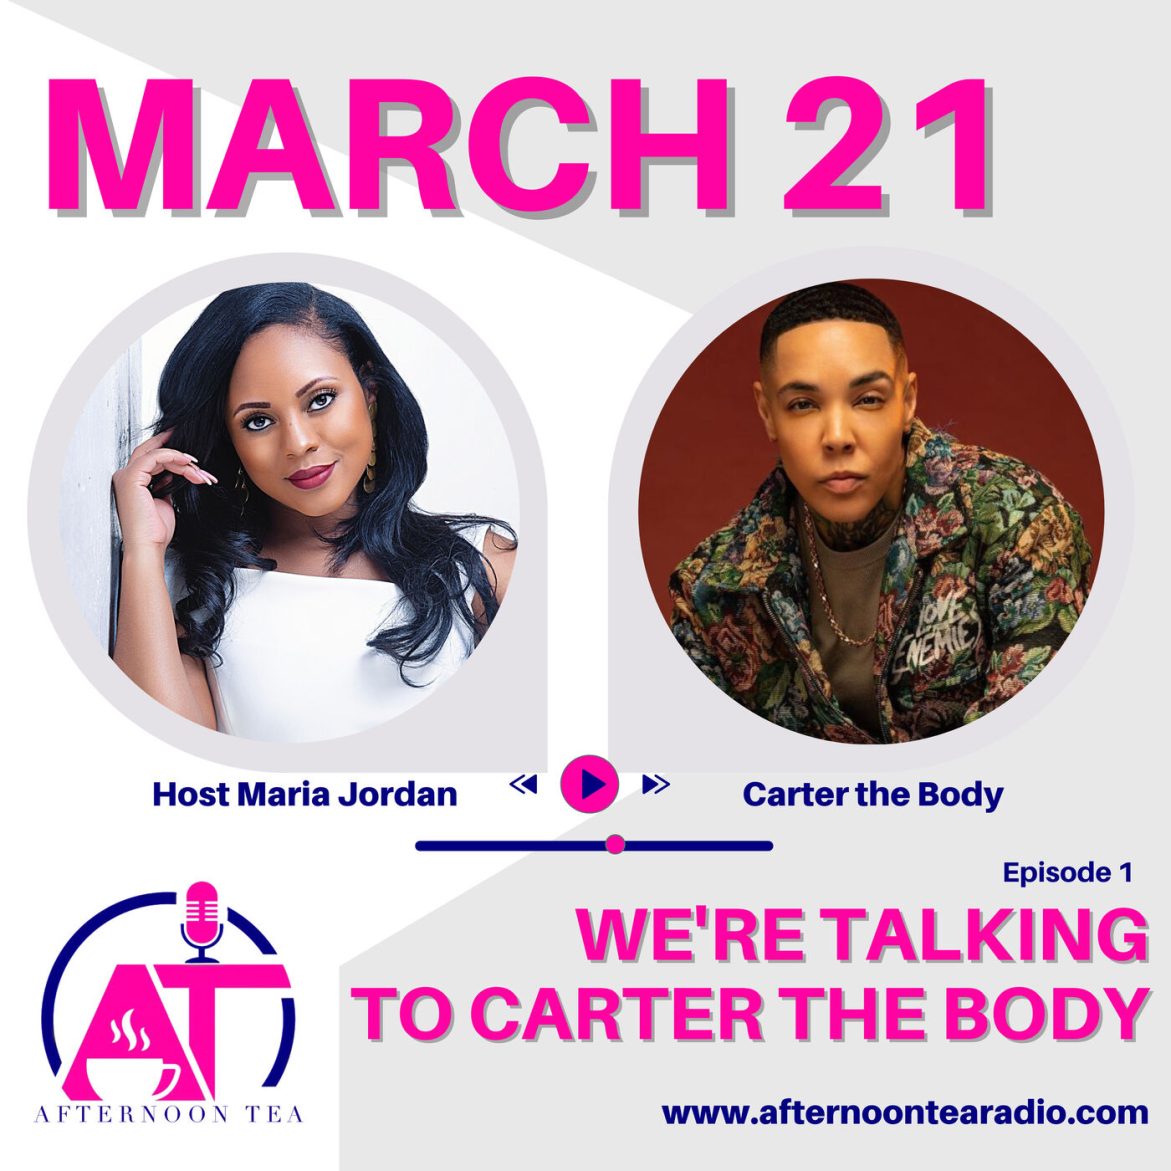 Black Podcasting - Breaking Boundaries: From Exotic Dancer to Actor - A Conversation with Carter the Body